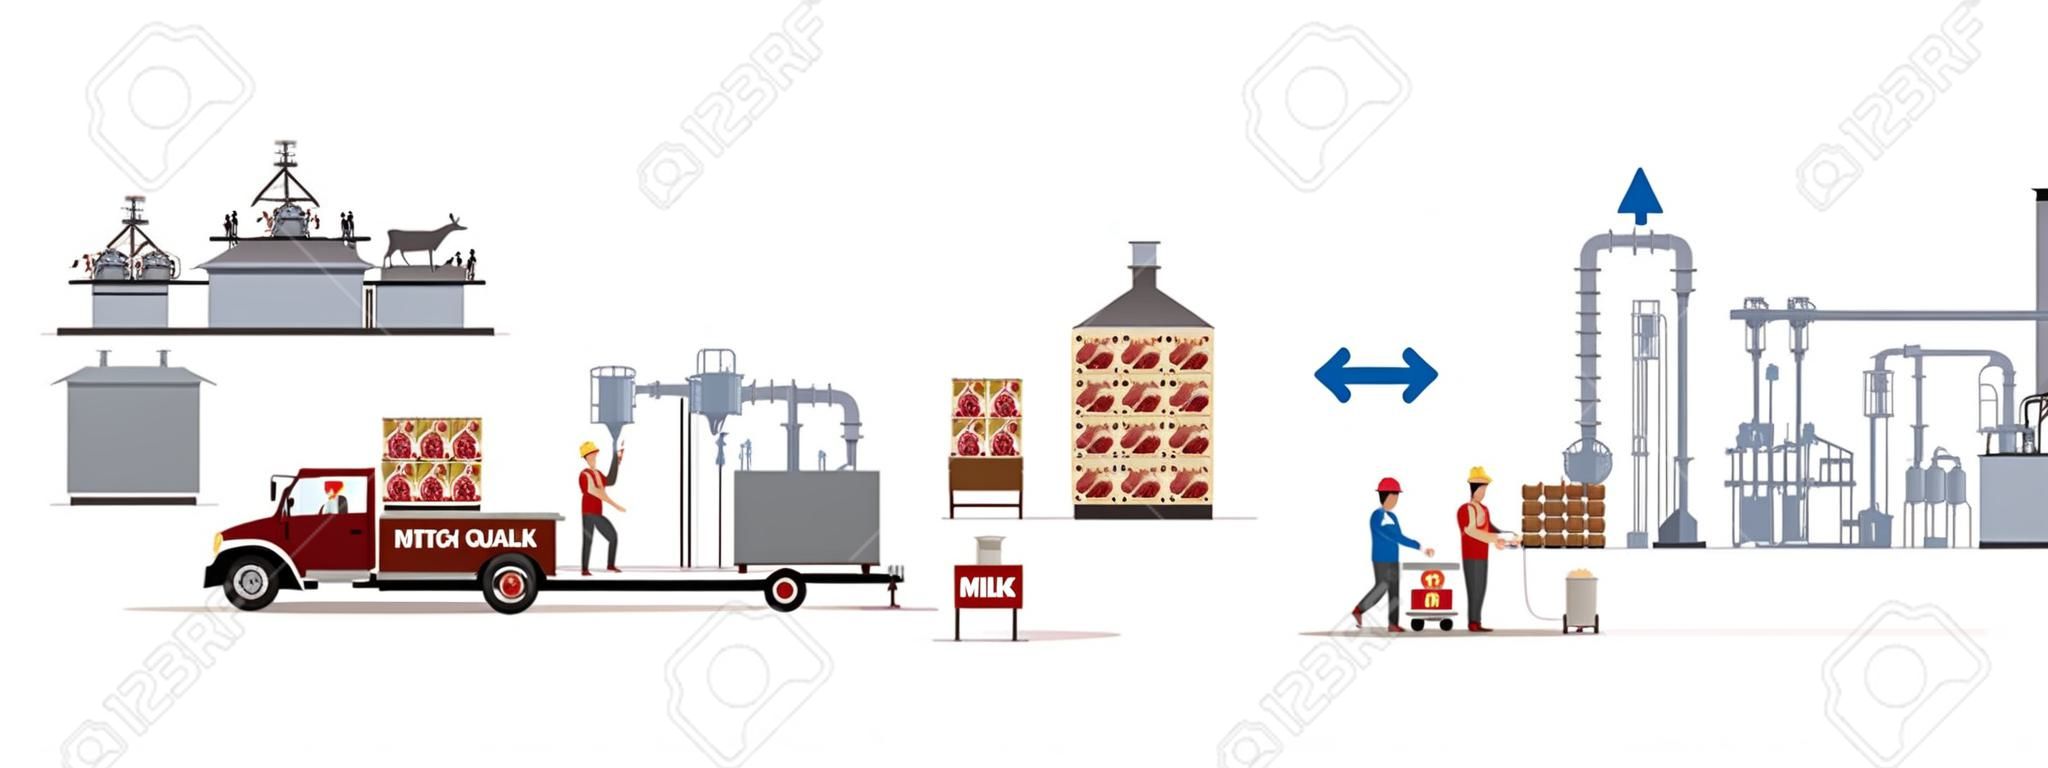 Milk and meat factory with automatic machines and workers. Vector illustration.